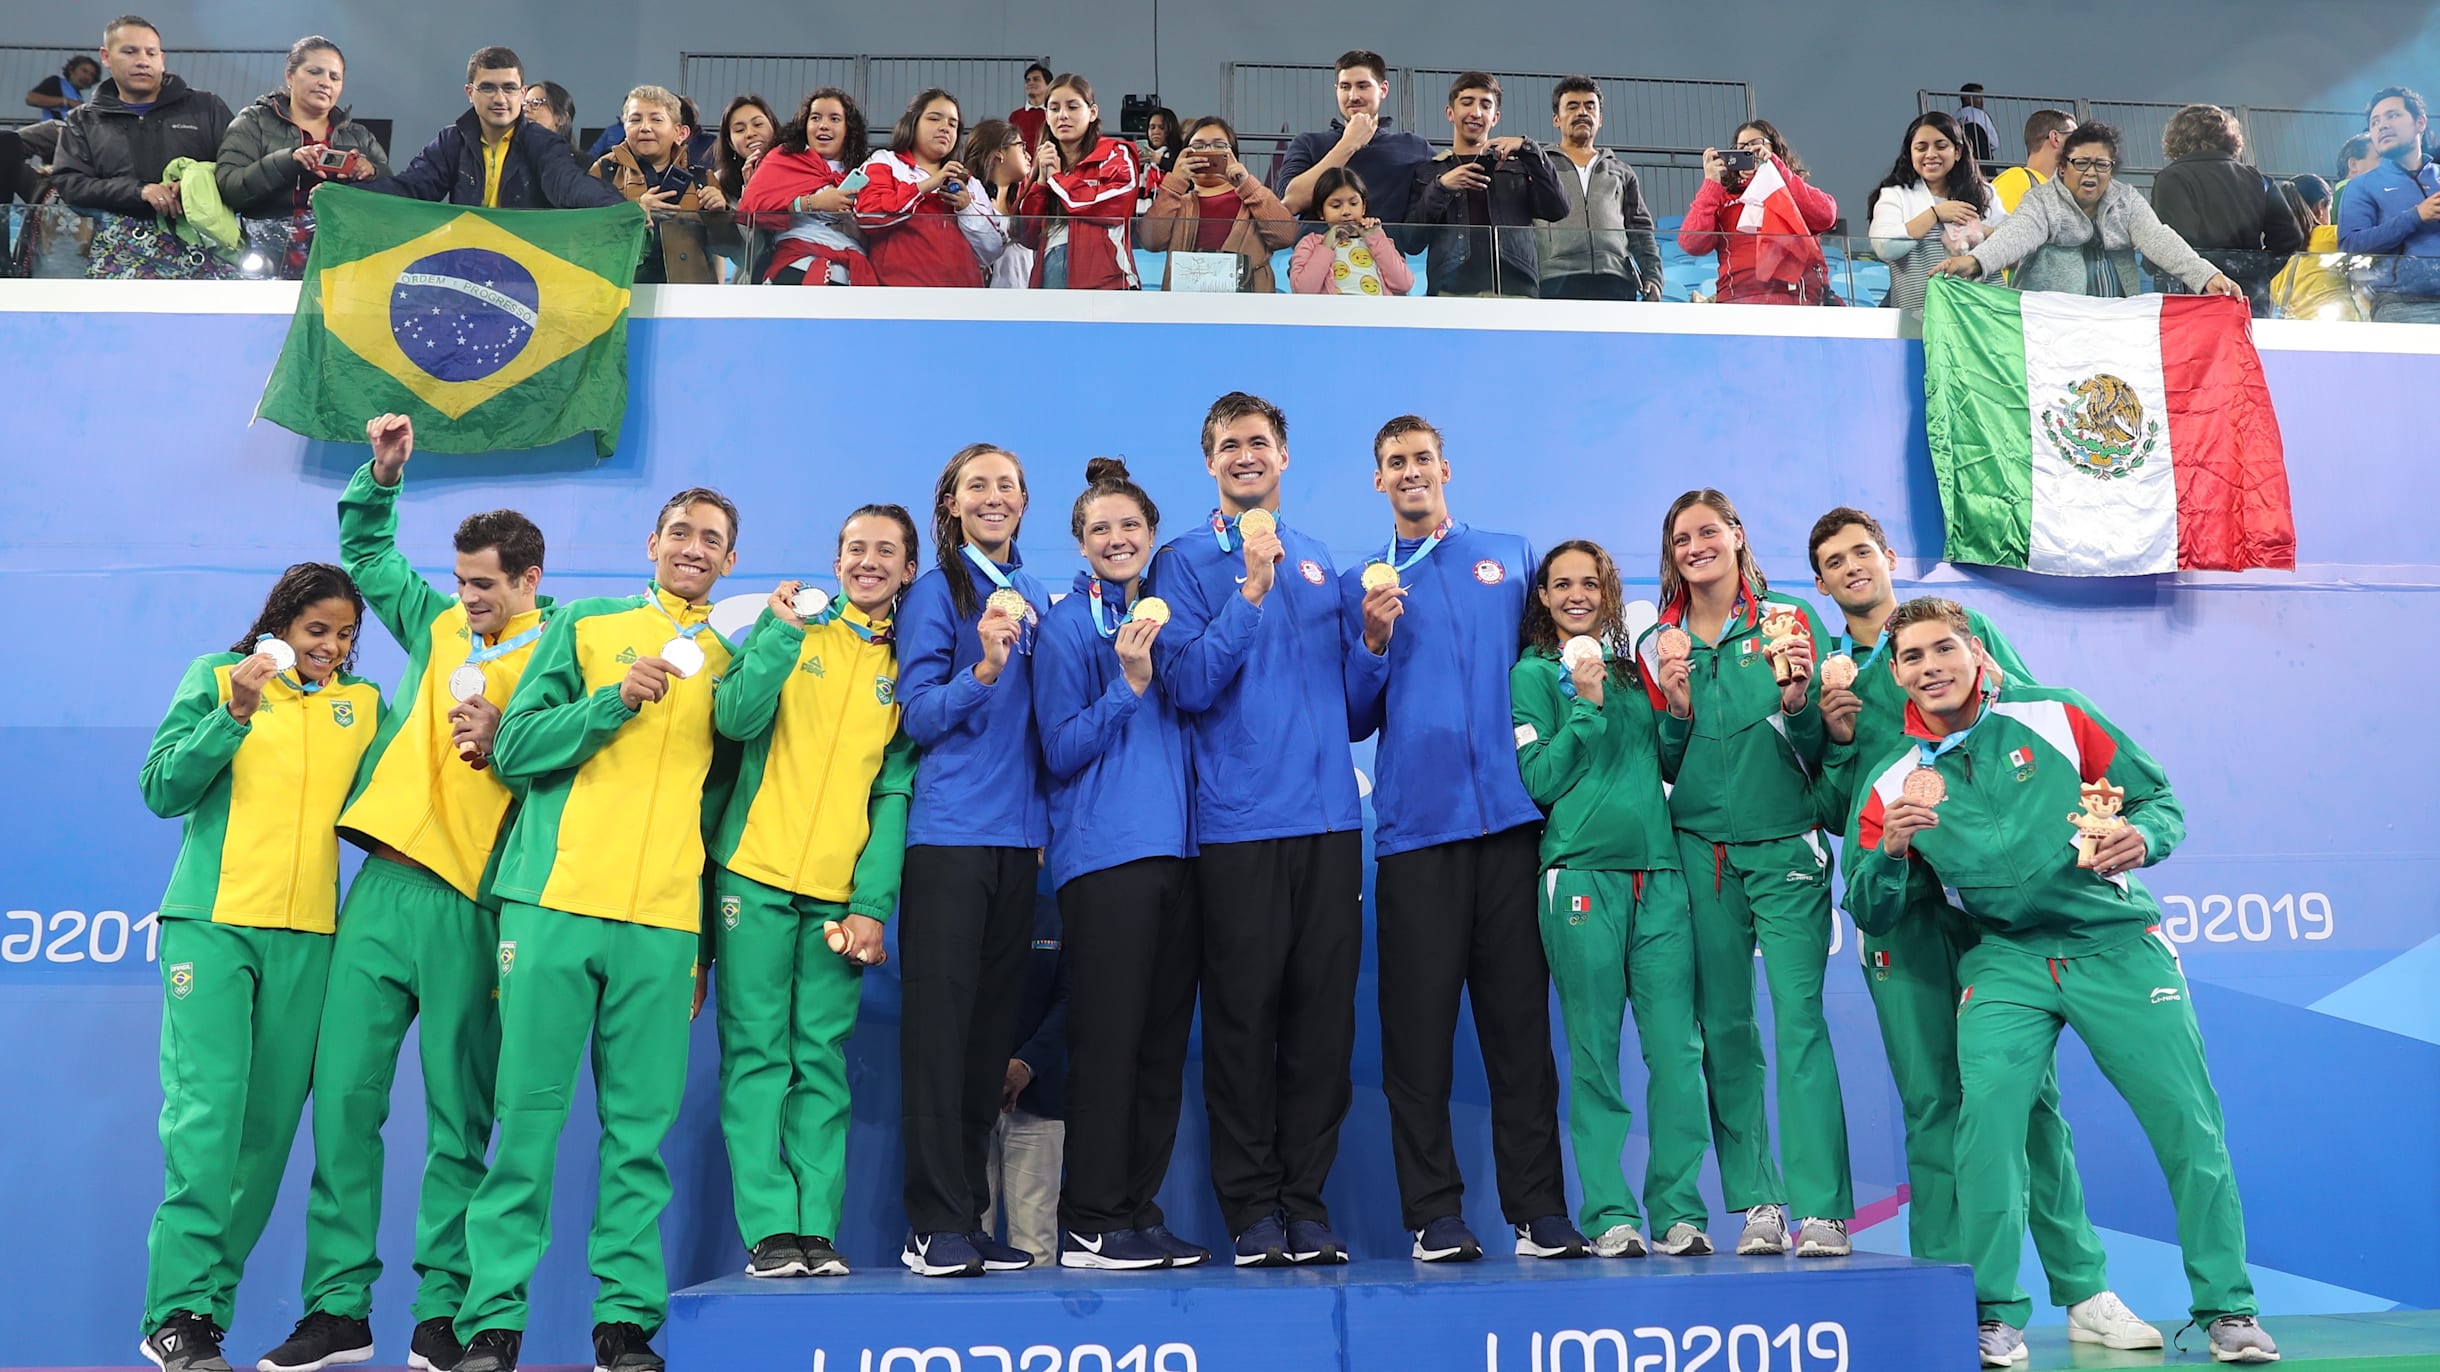 Brazil is two-time champion in the PASA Pan American Surfing Games